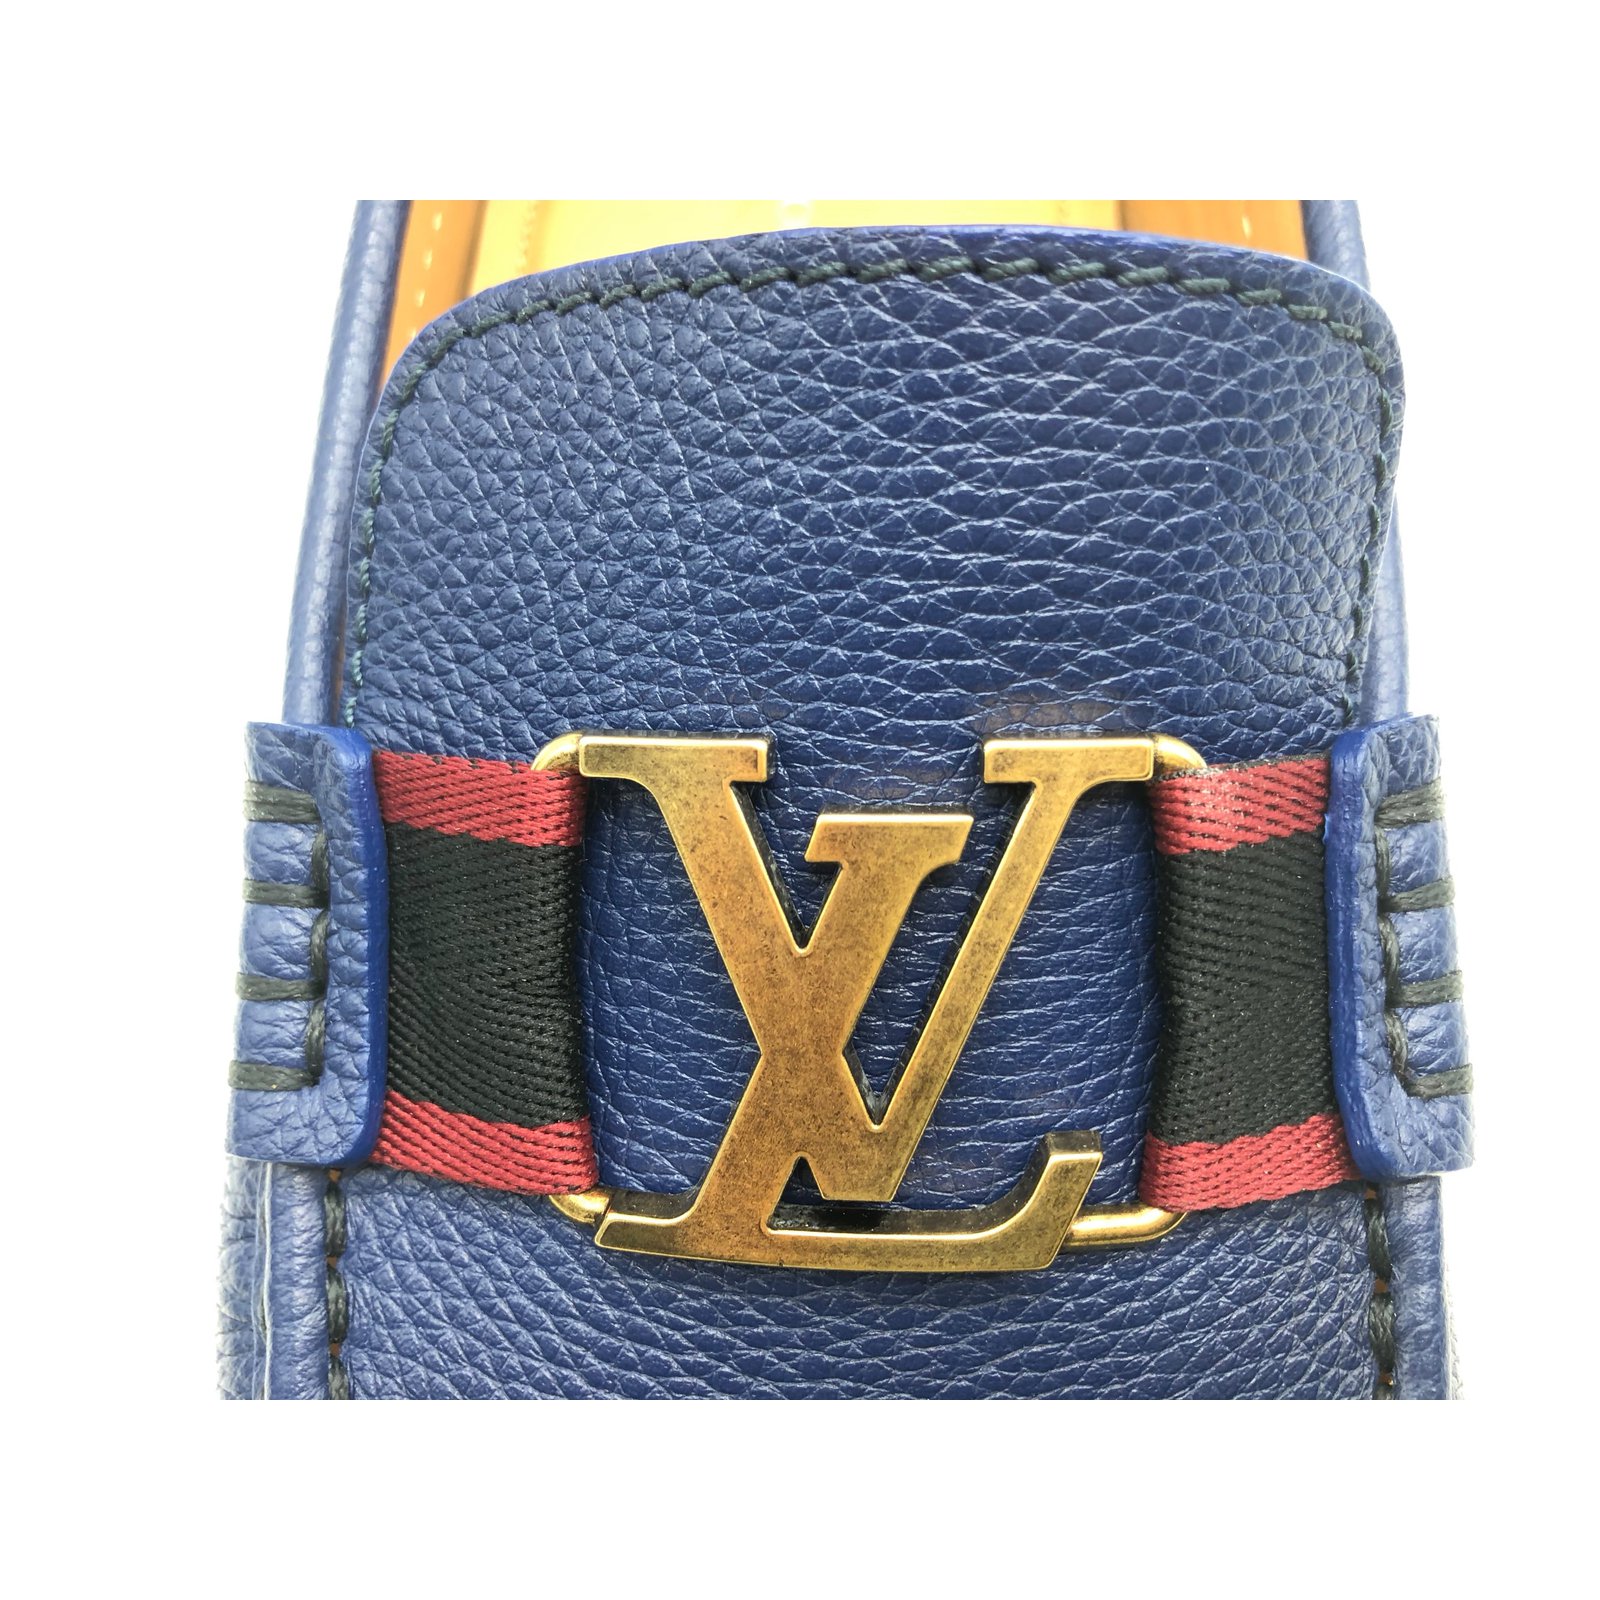 Louis Vuitton Blue Monte Carlo Moccasin Loafers 10 – The Closet